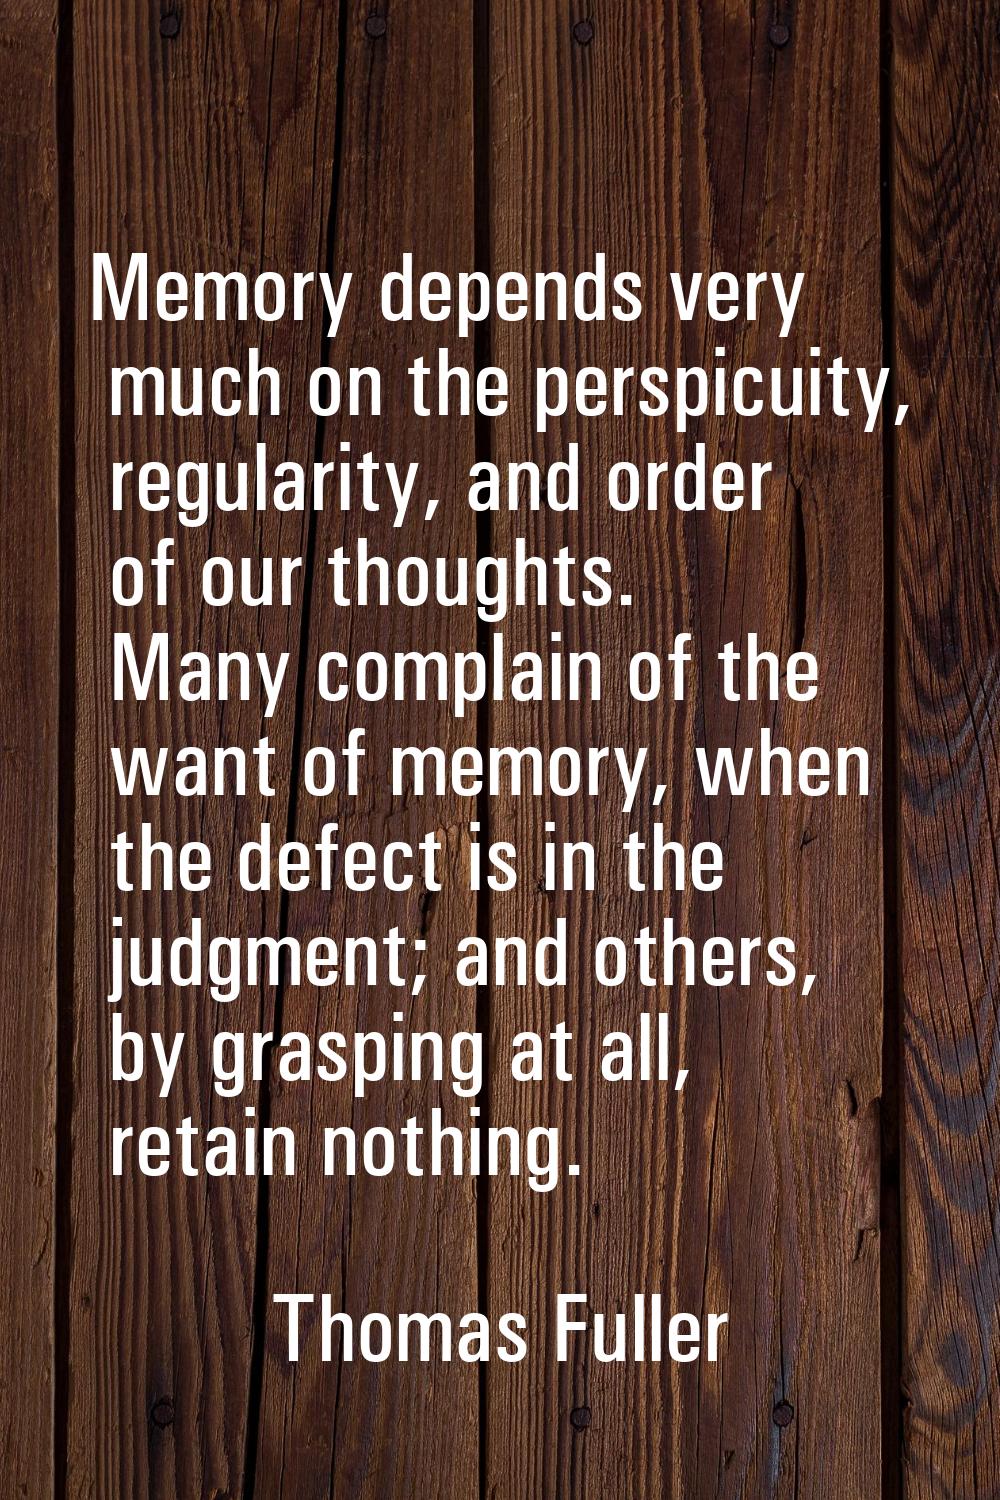 Memory depends very much on the perspicuity, regularity, and order of our thoughts. Many complain o